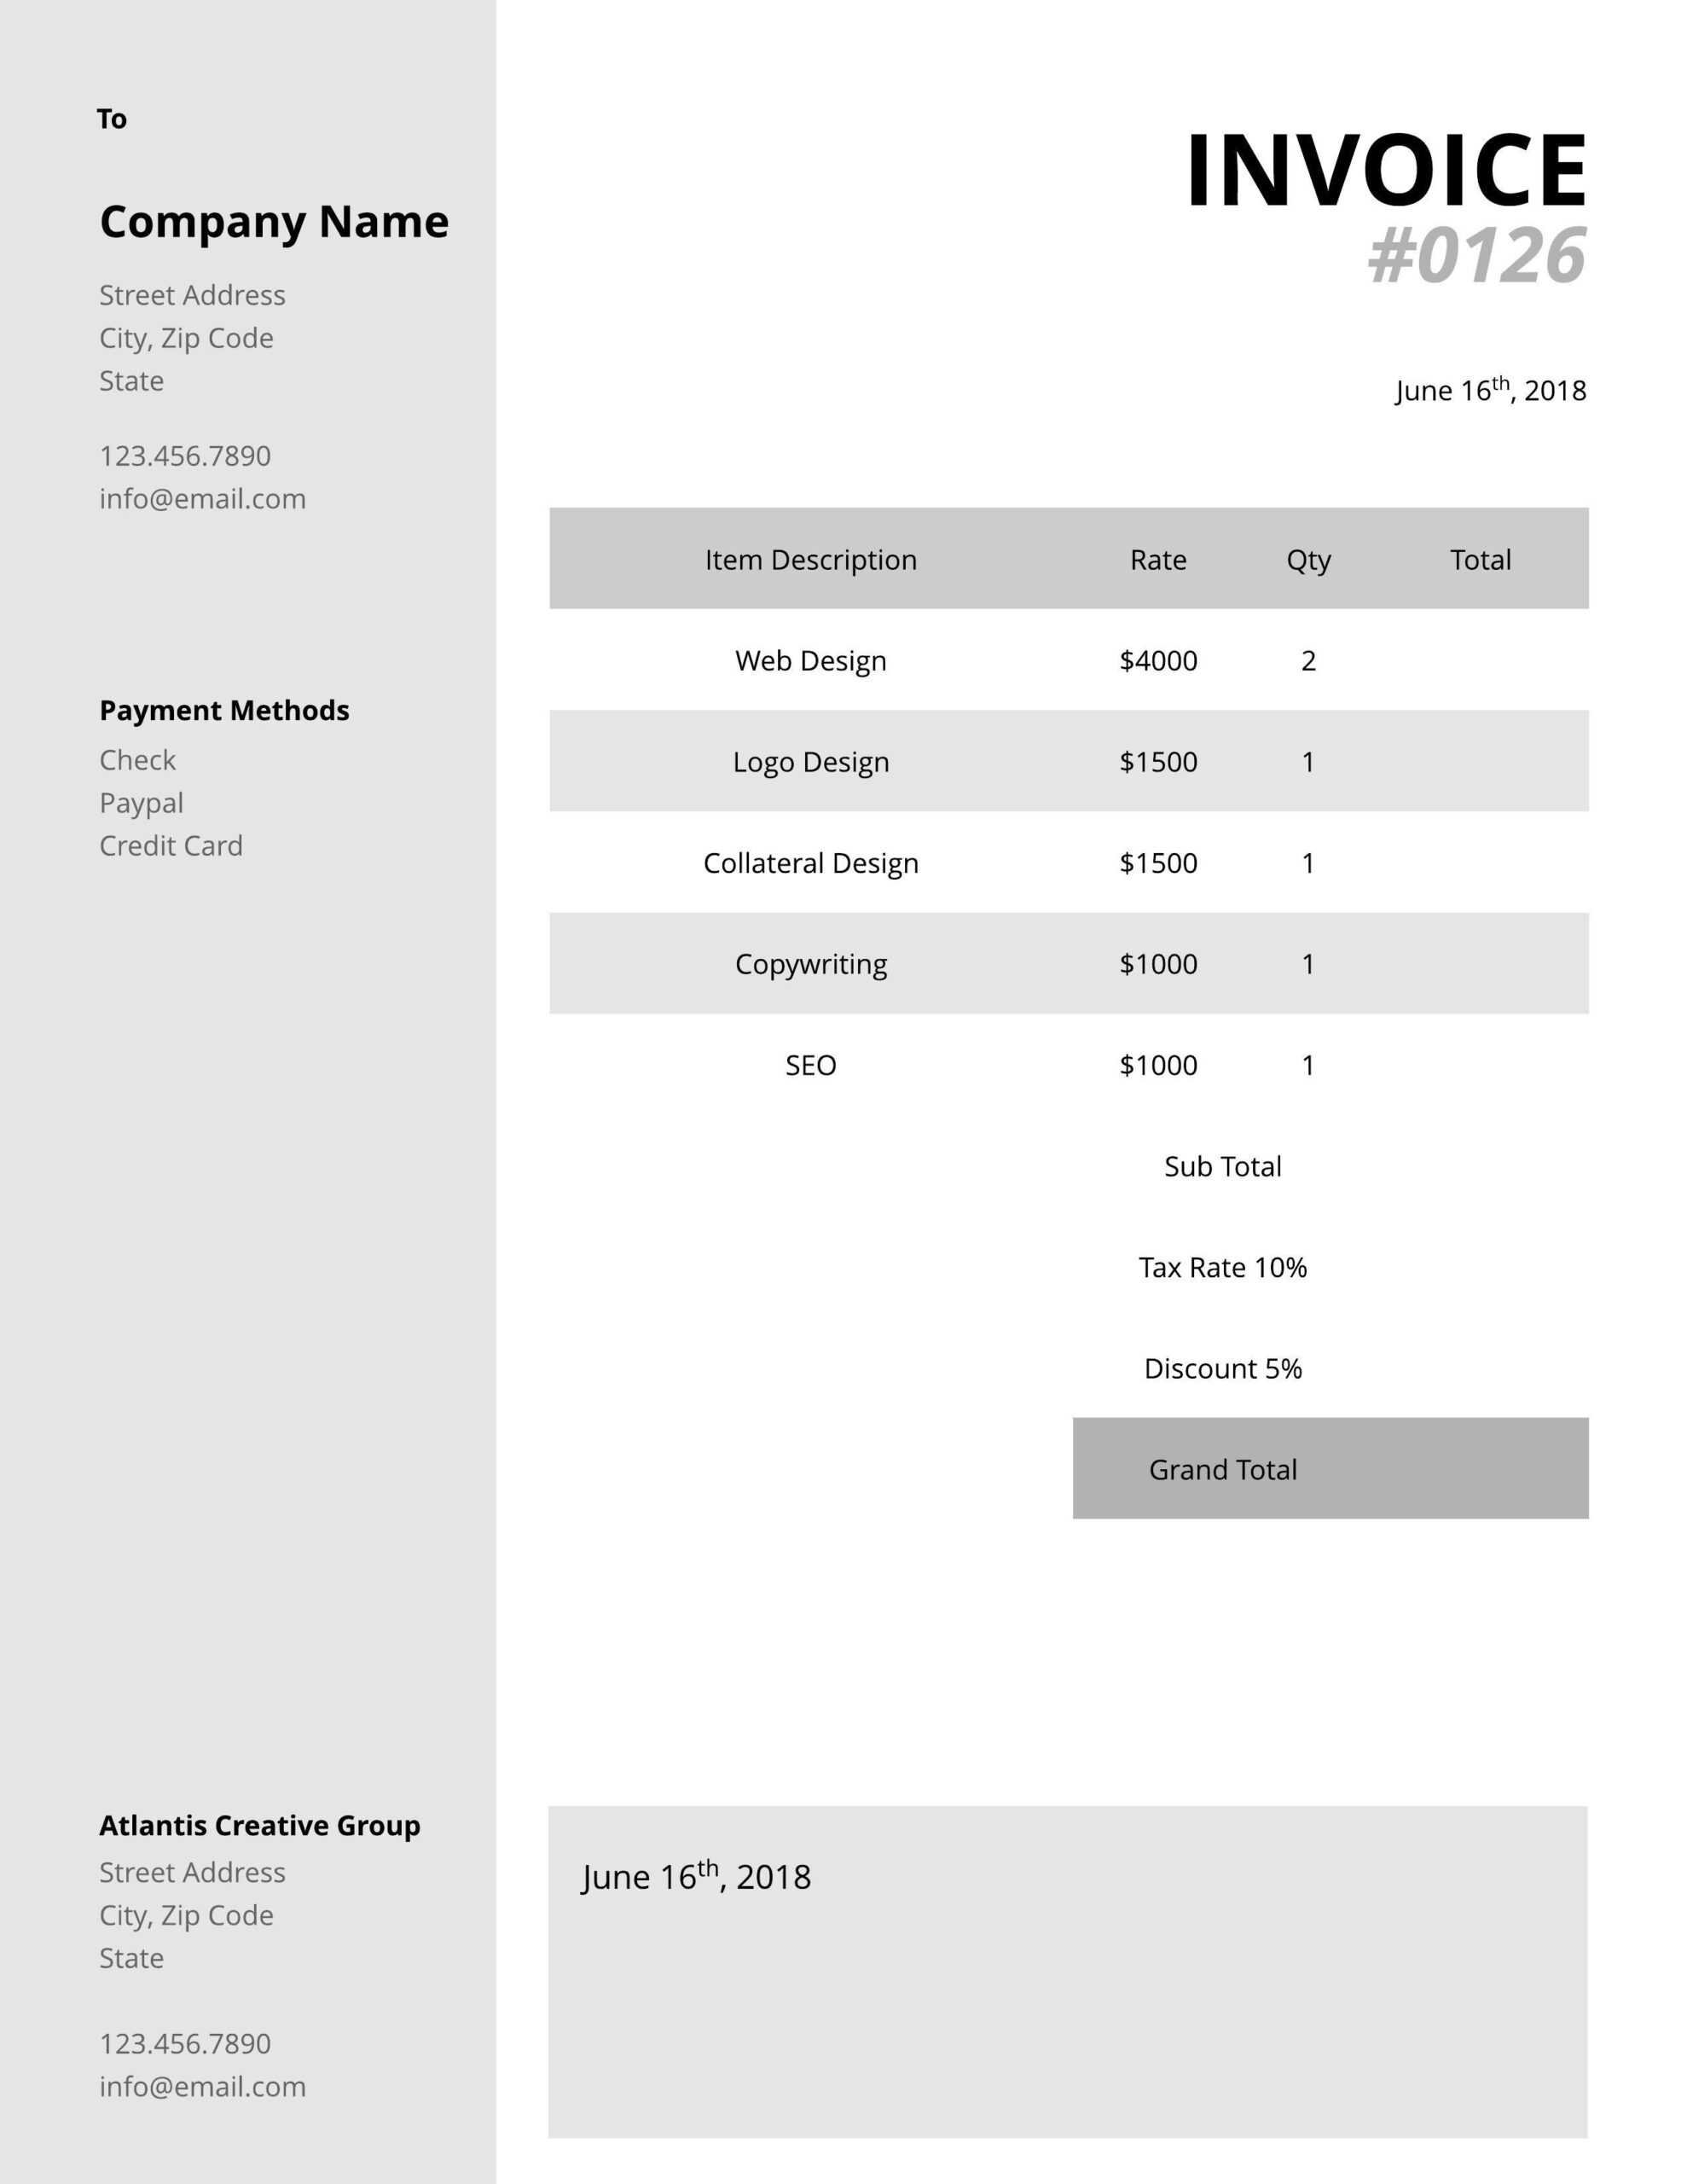 Free Invoice Templates & Examples | Lucidpress Regarding Download An Invoice Template